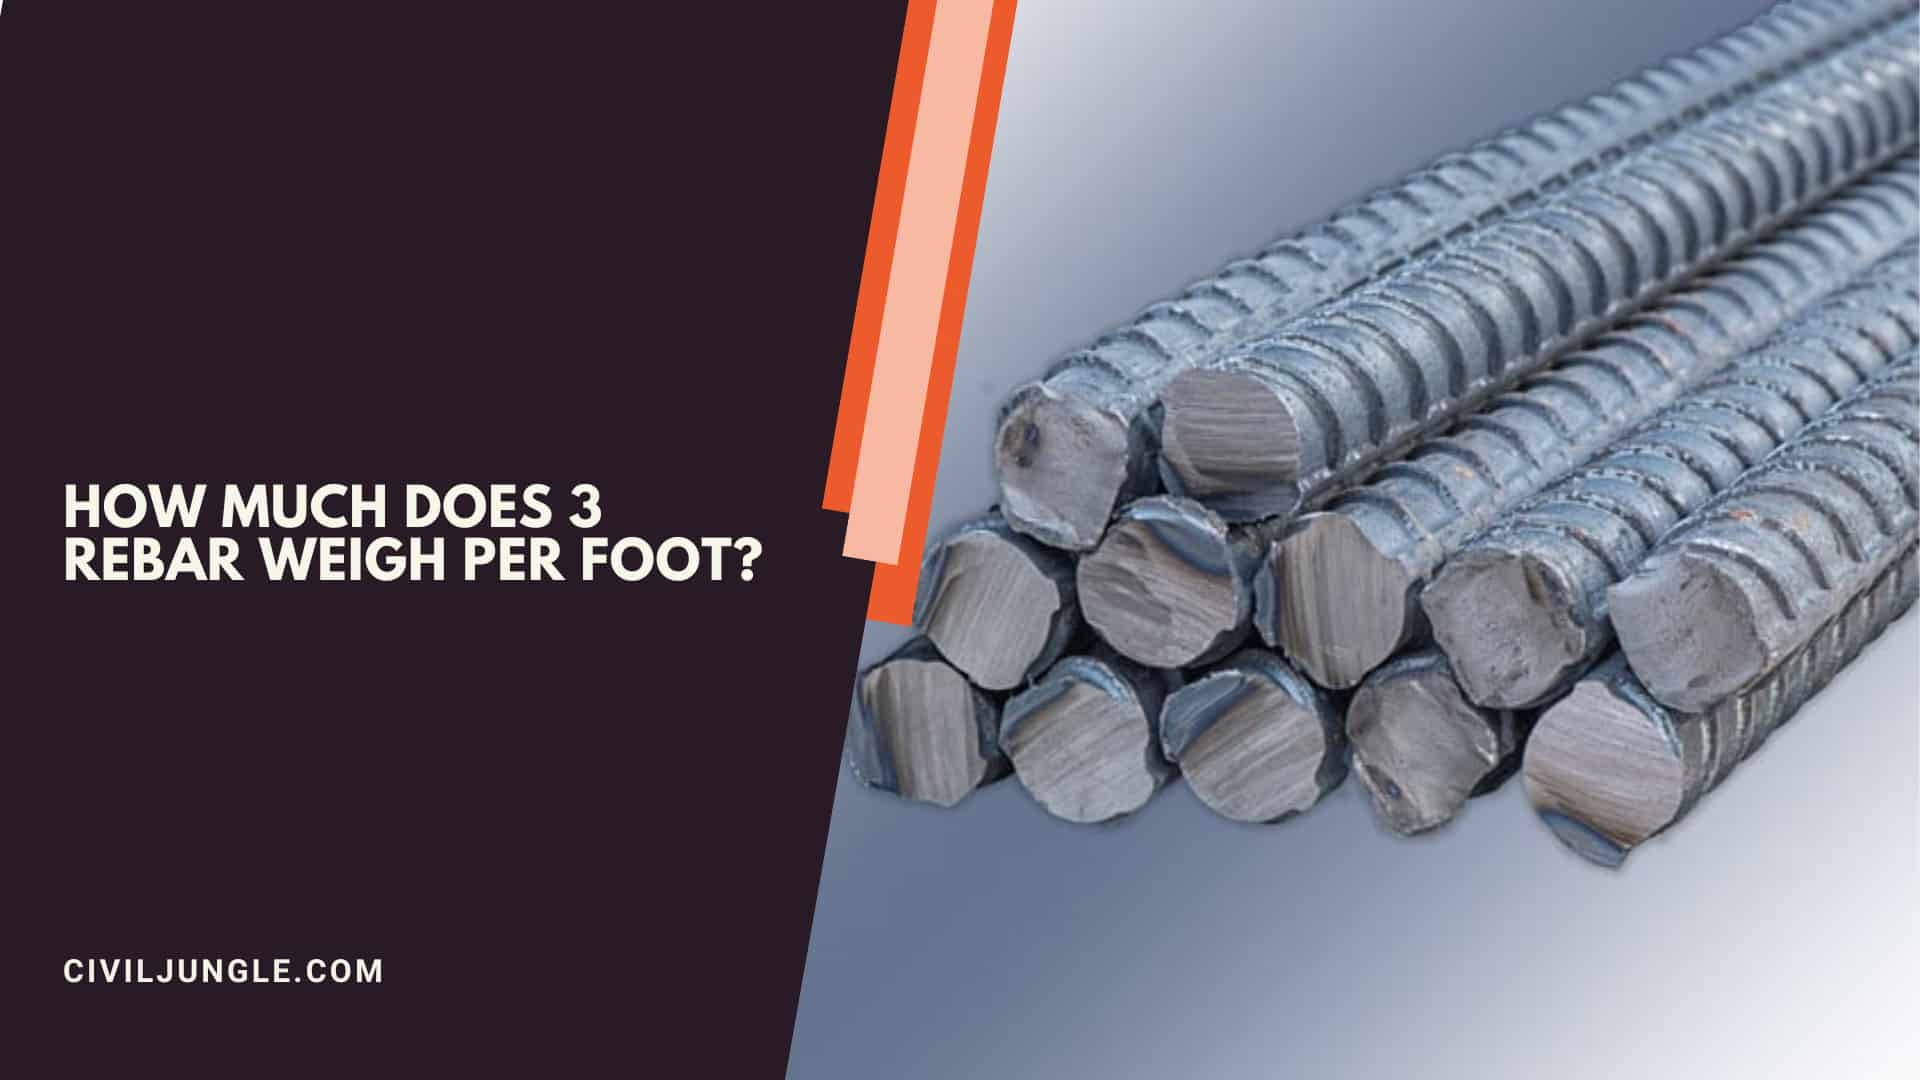 How Much Does 3 Rebar Weigh Per Foot?